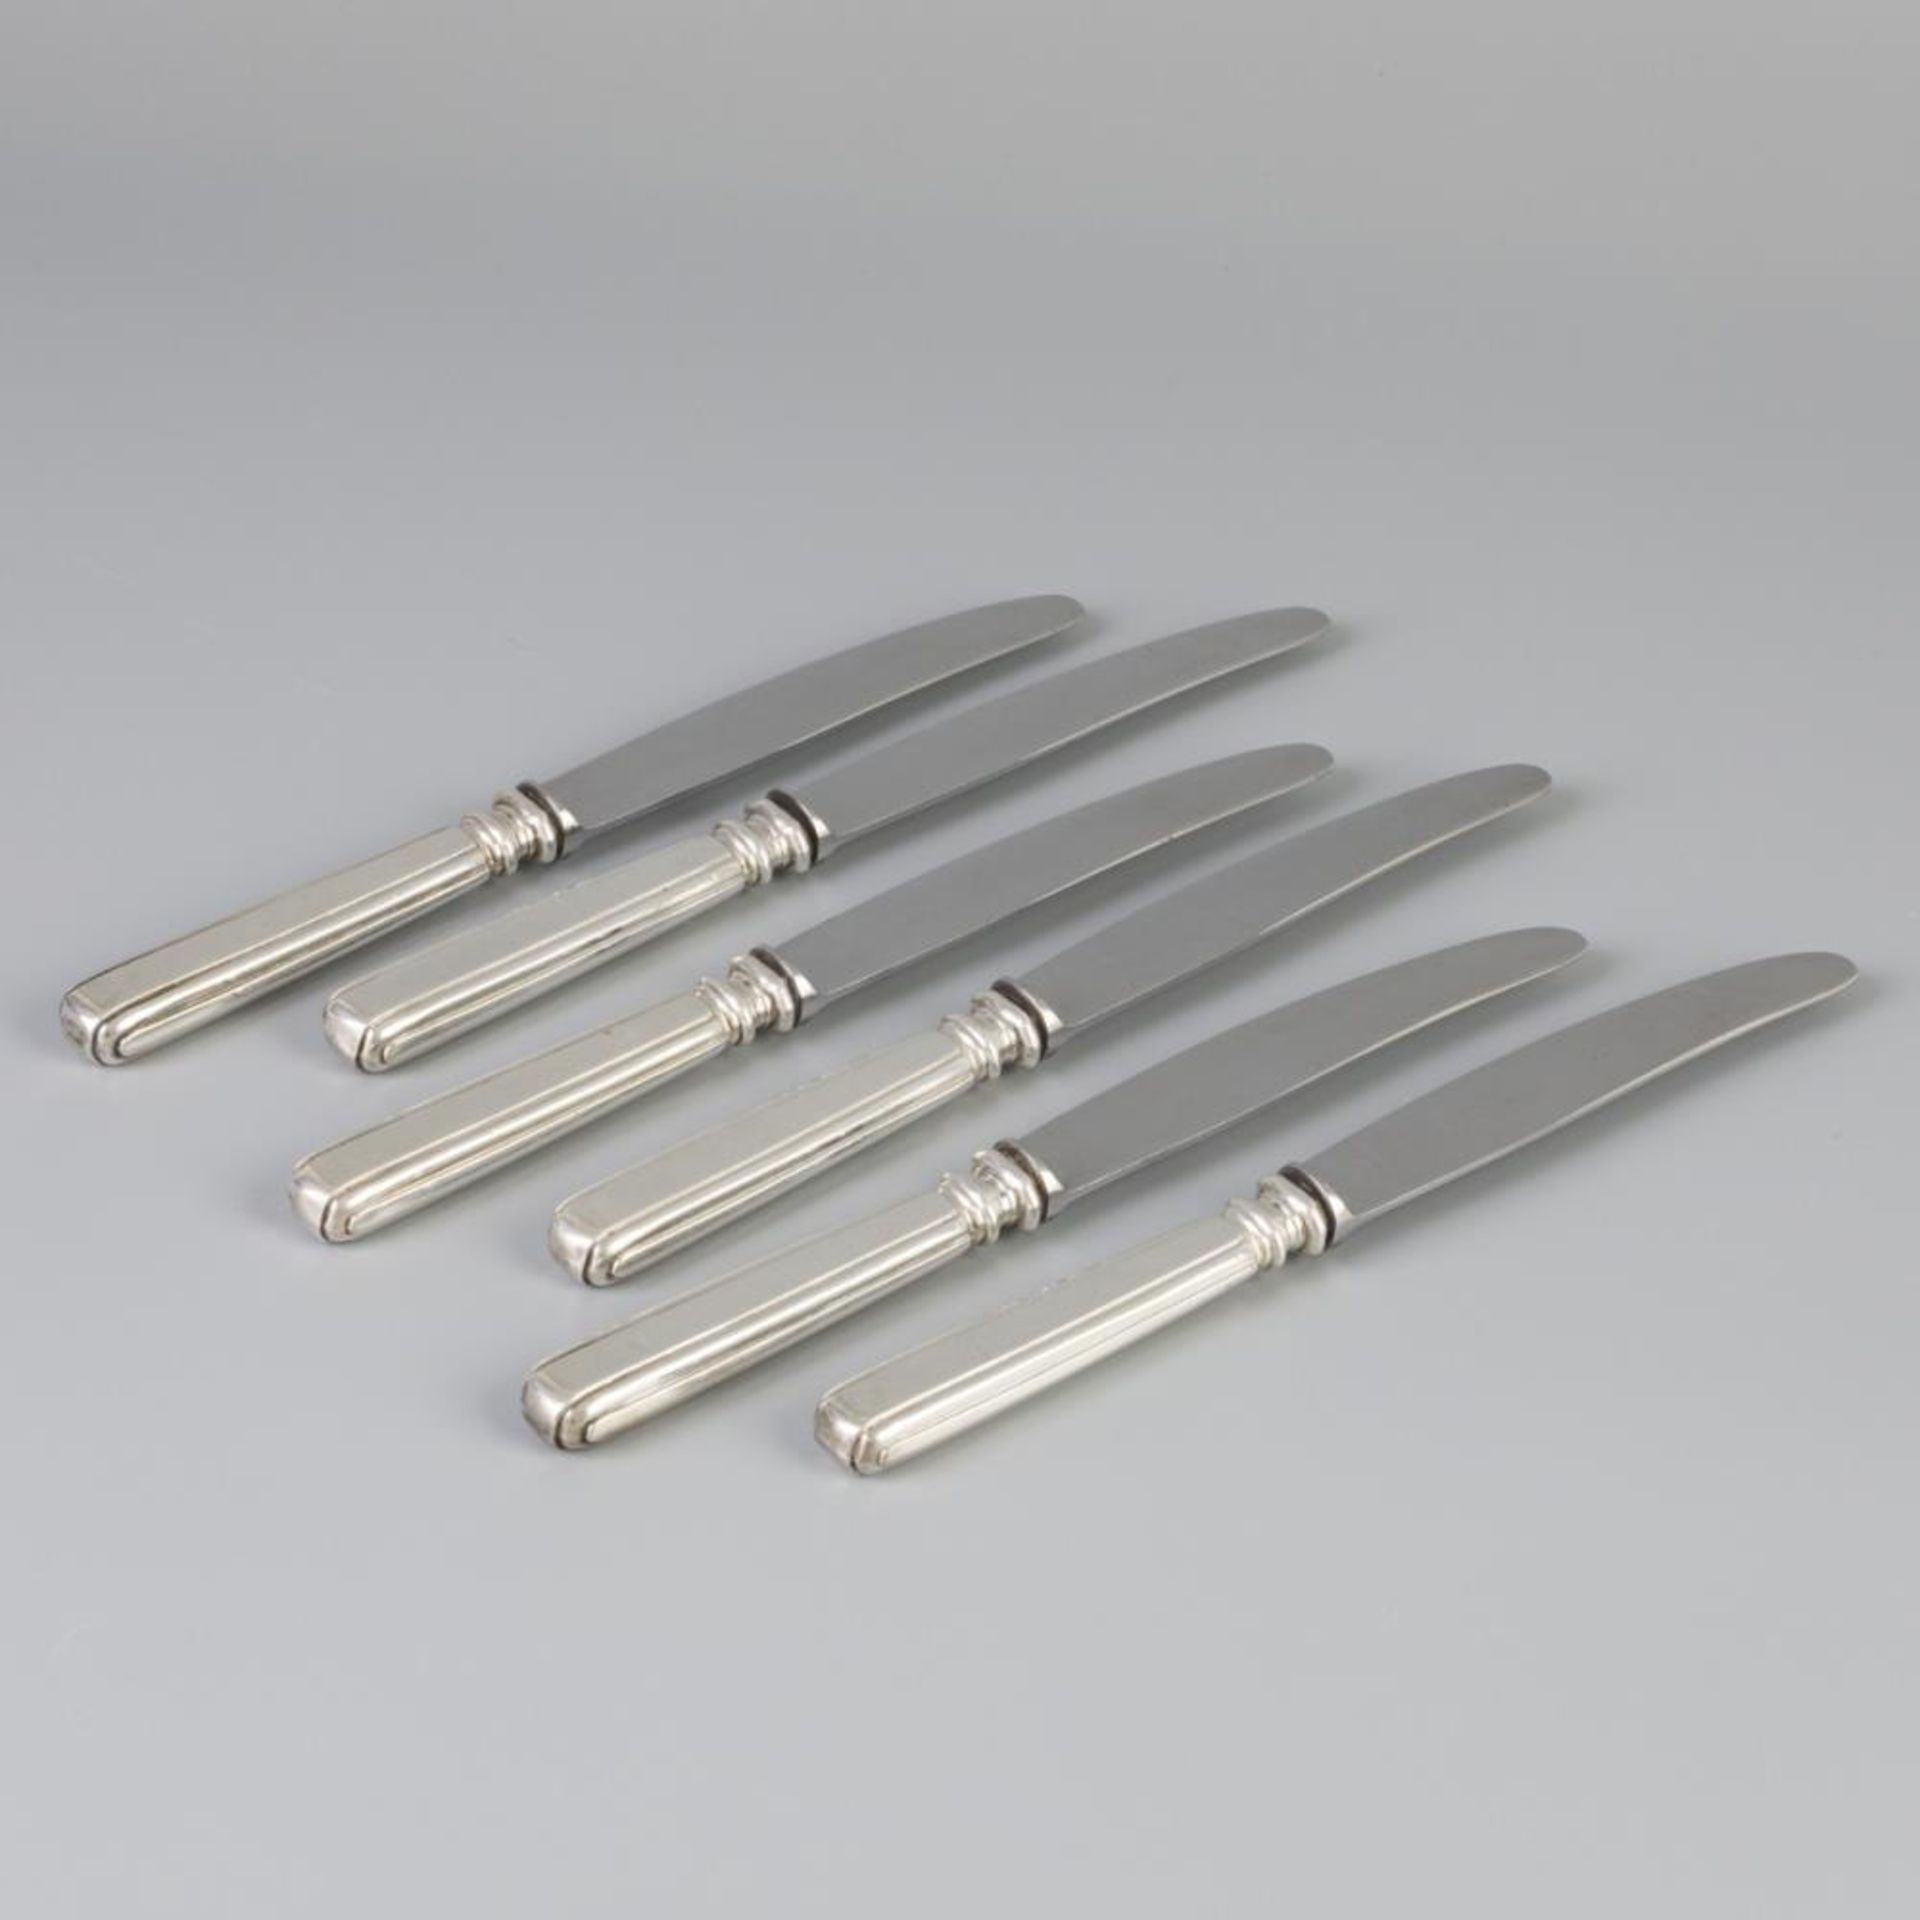 11 piece lot of knives silver. - Image 5 of 8